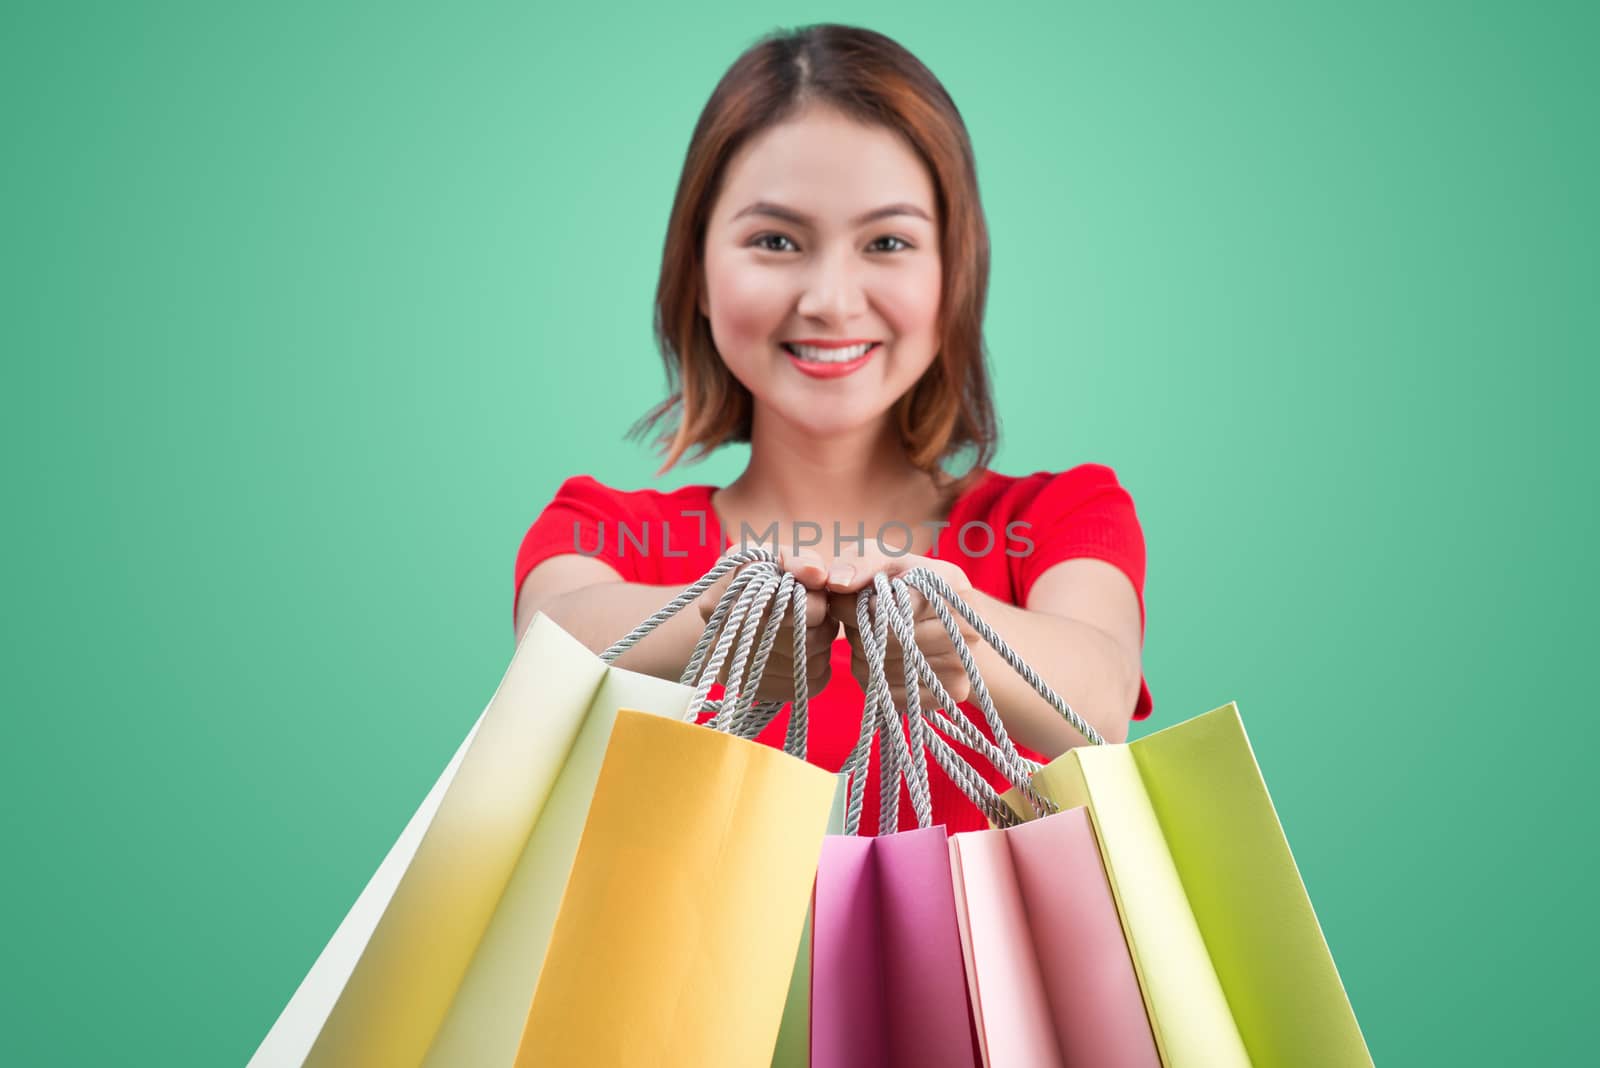 Beautiful young asian woman with colored shopping bags over blue background. Focus on bags.